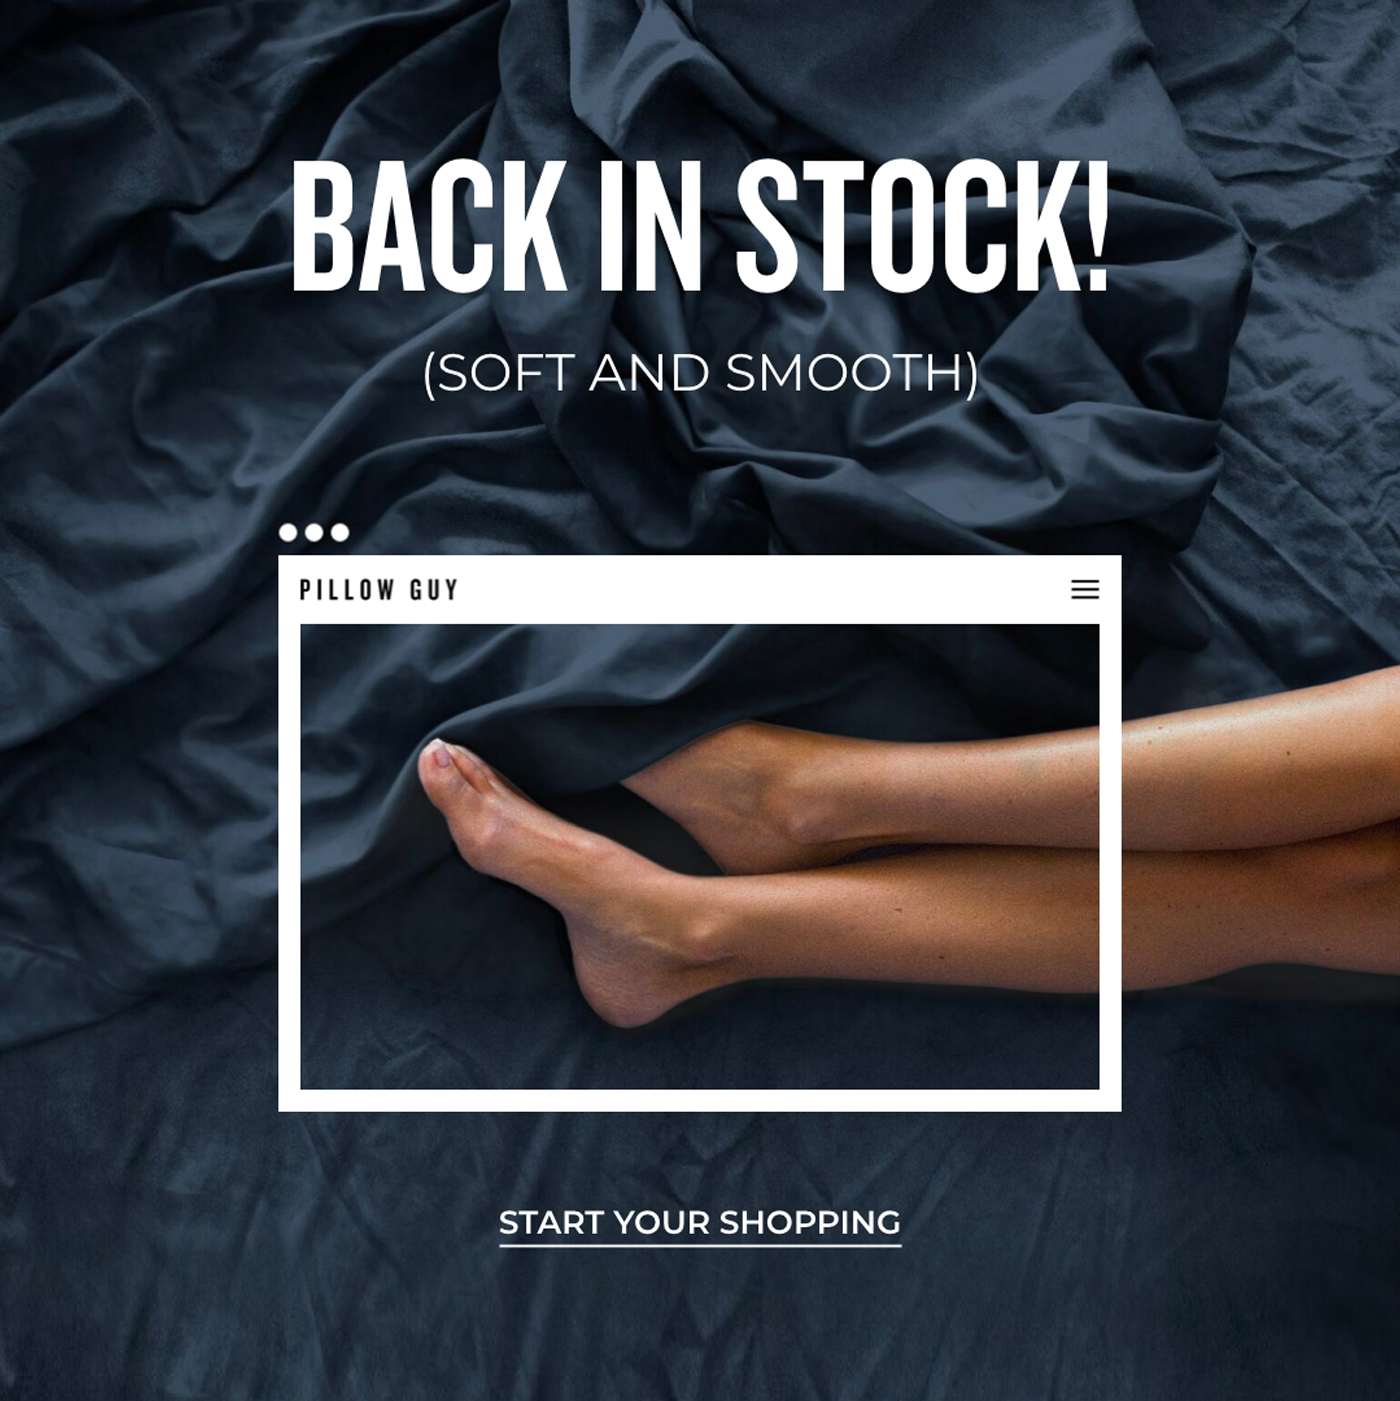 Pillow Guy Back in Stock Facebook Ad Design